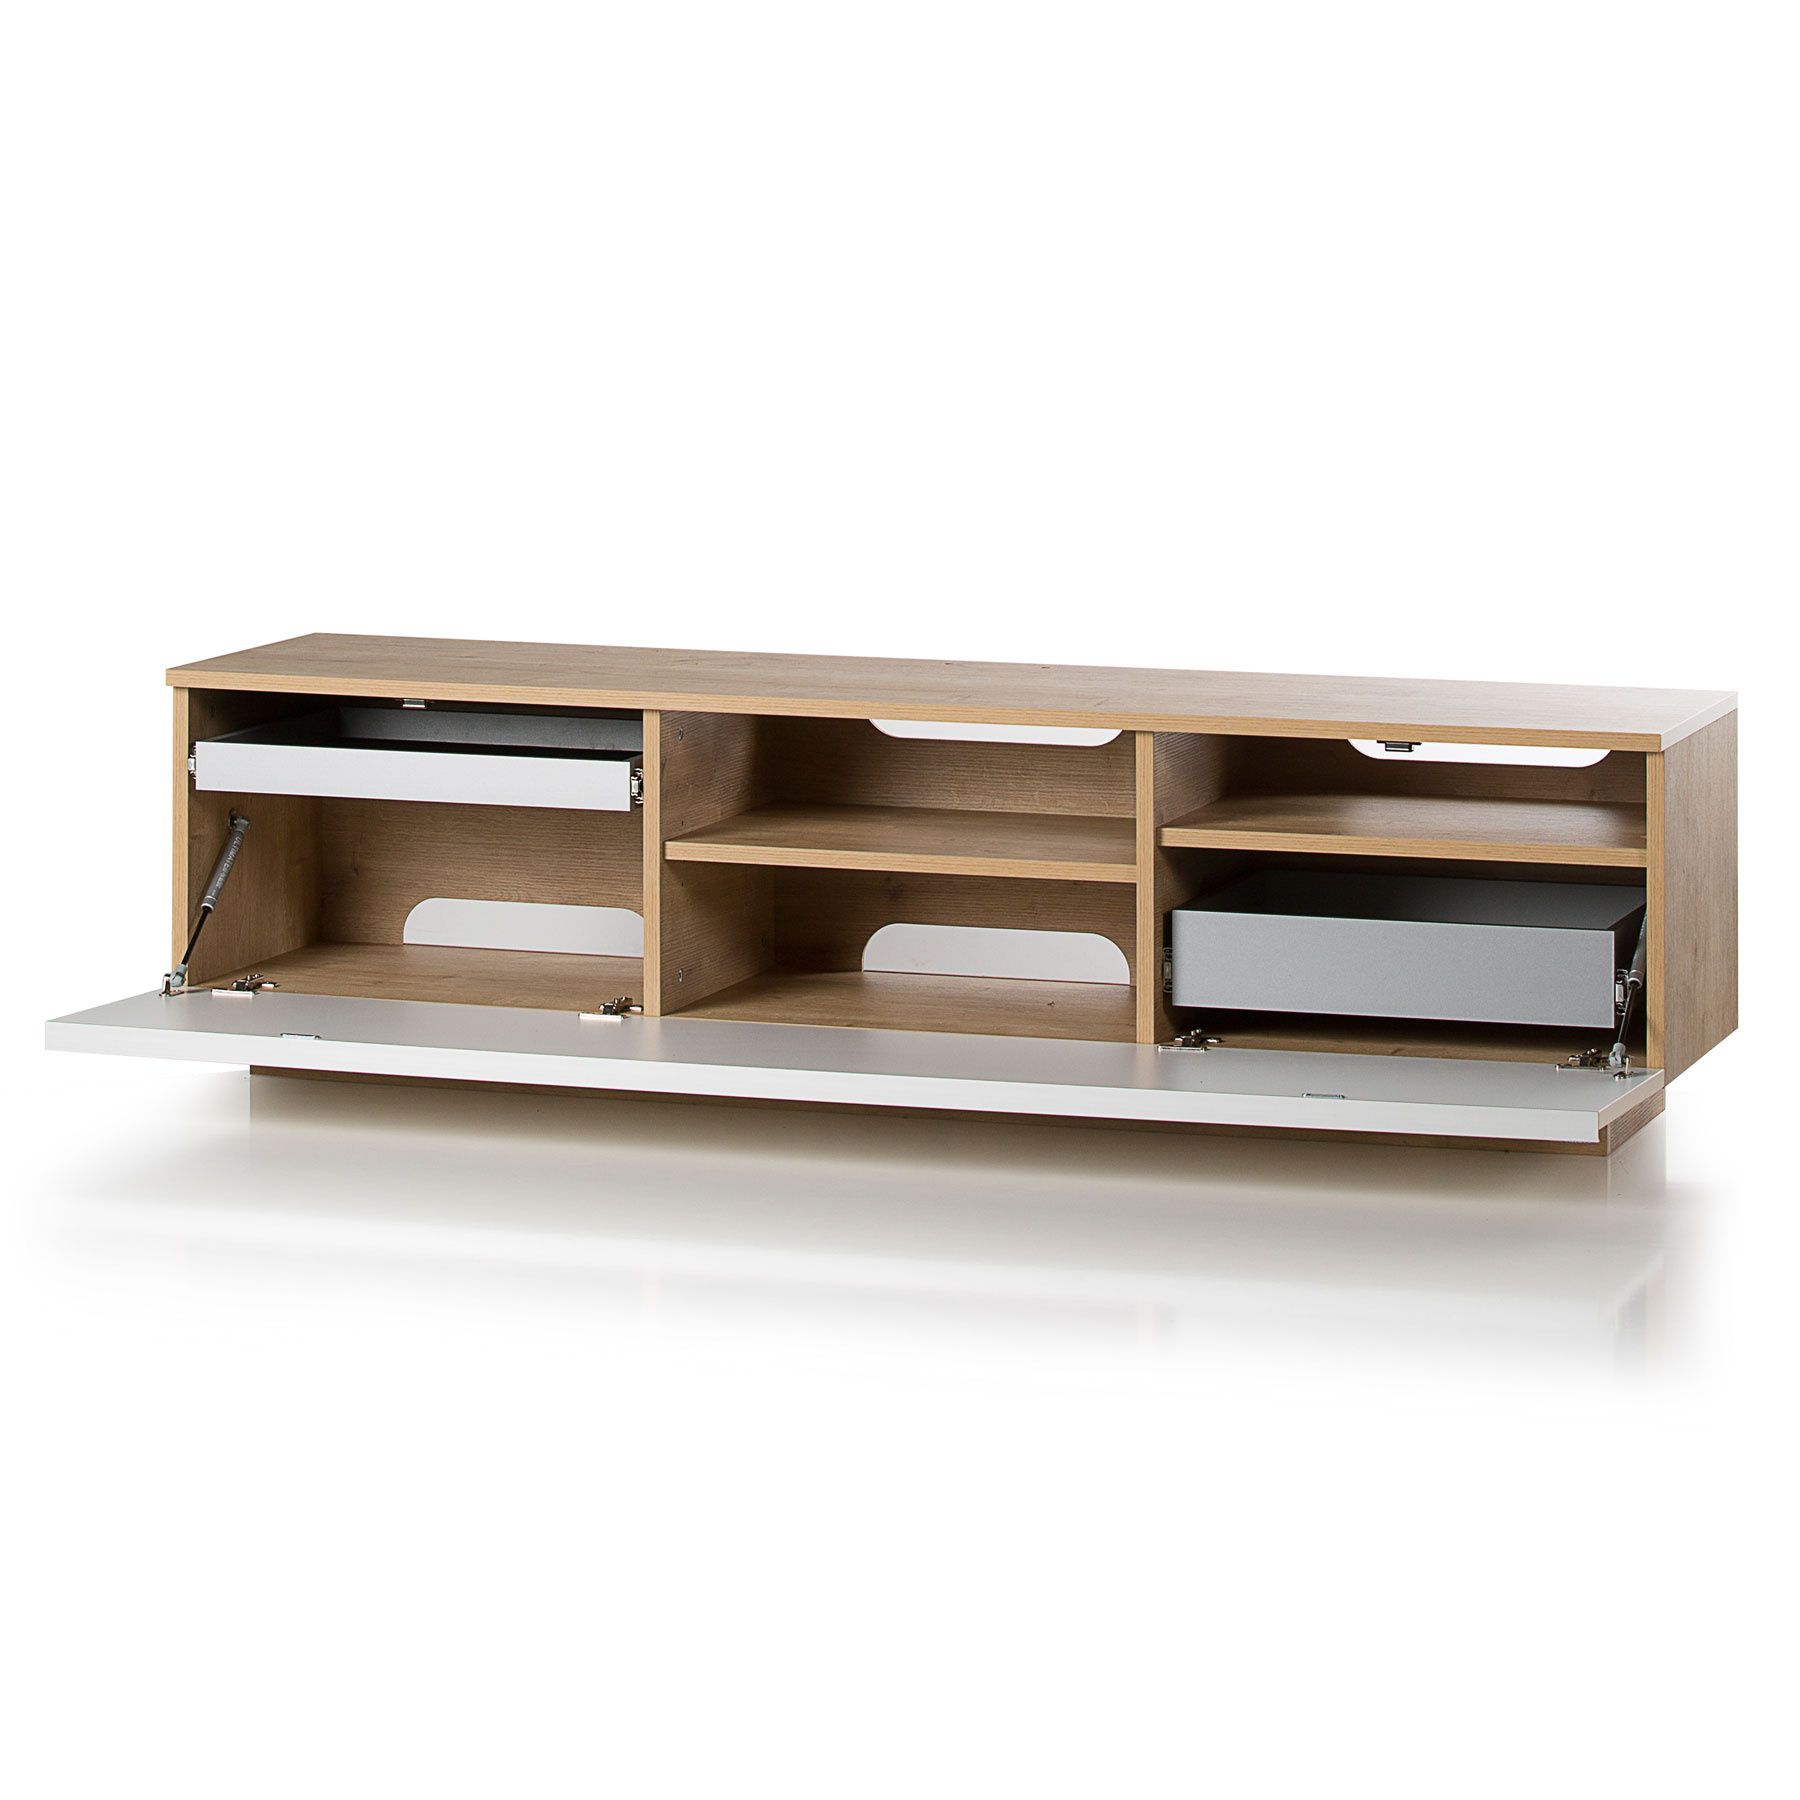 Uk Cf Fusion 160cm Oak And Cream Tv Stand For Up To 70" Tvs Throughout Cream Tv Cabinets (View 5 of 15)